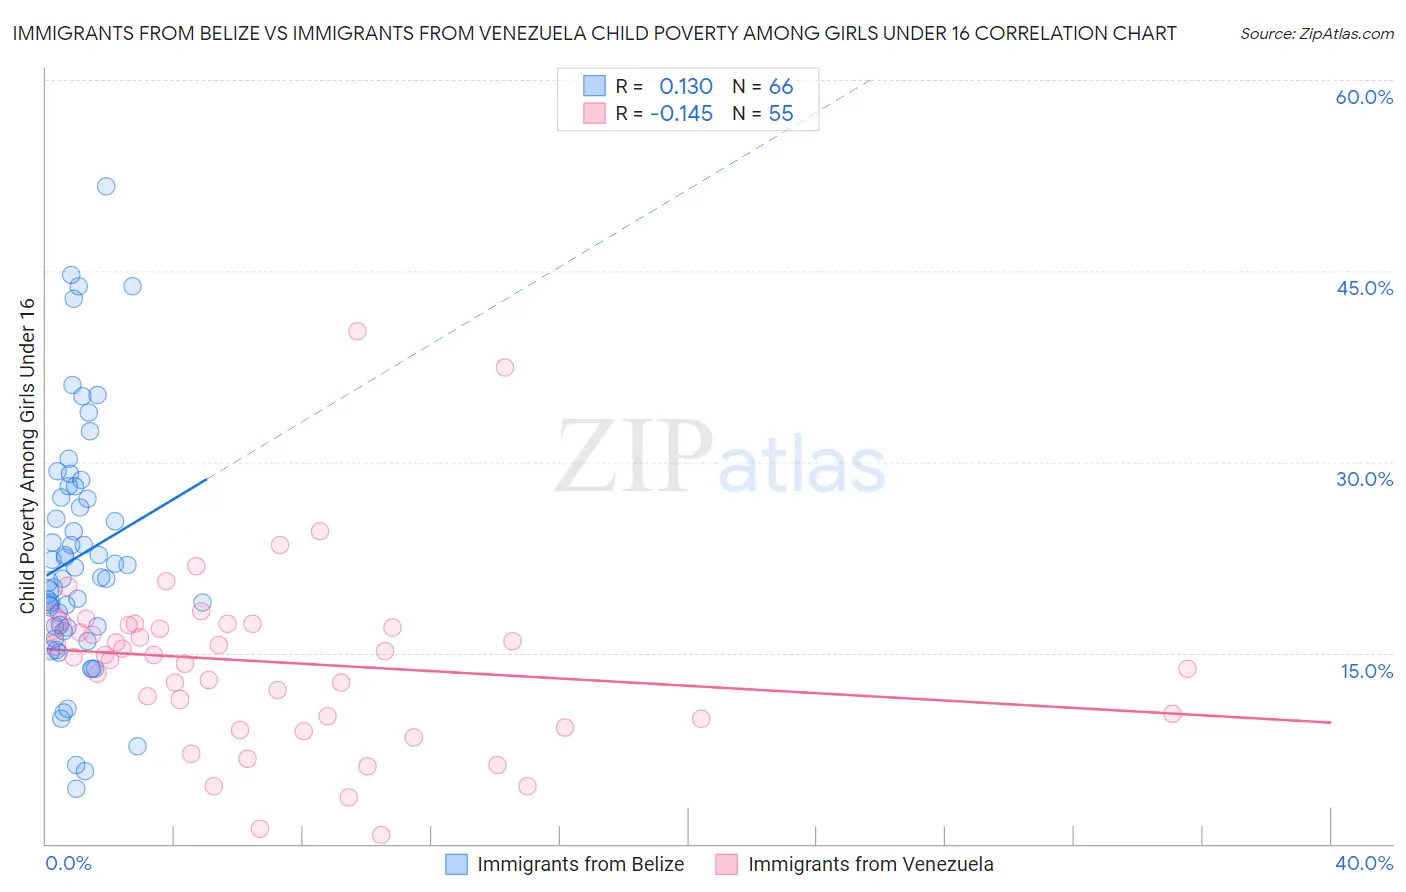 Immigrants from Belize vs Immigrants from Venezuela Child Poverty Among Girls Under 16